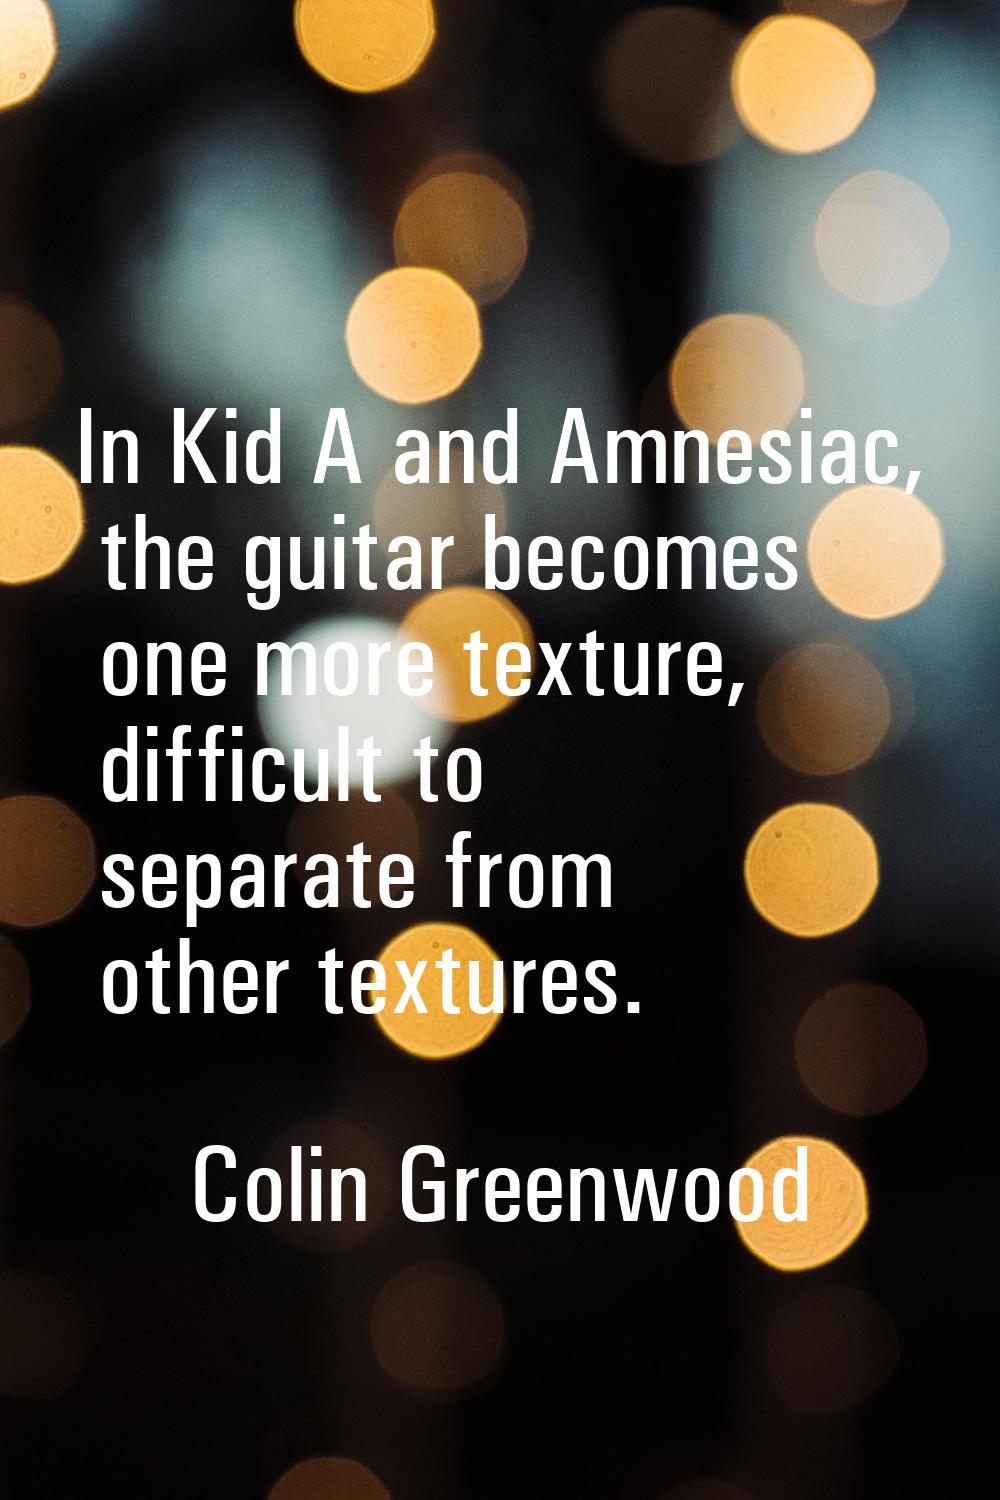 In Kid A and Amnesiac, the guitar becomes one more texture, difficult to separate from other textur